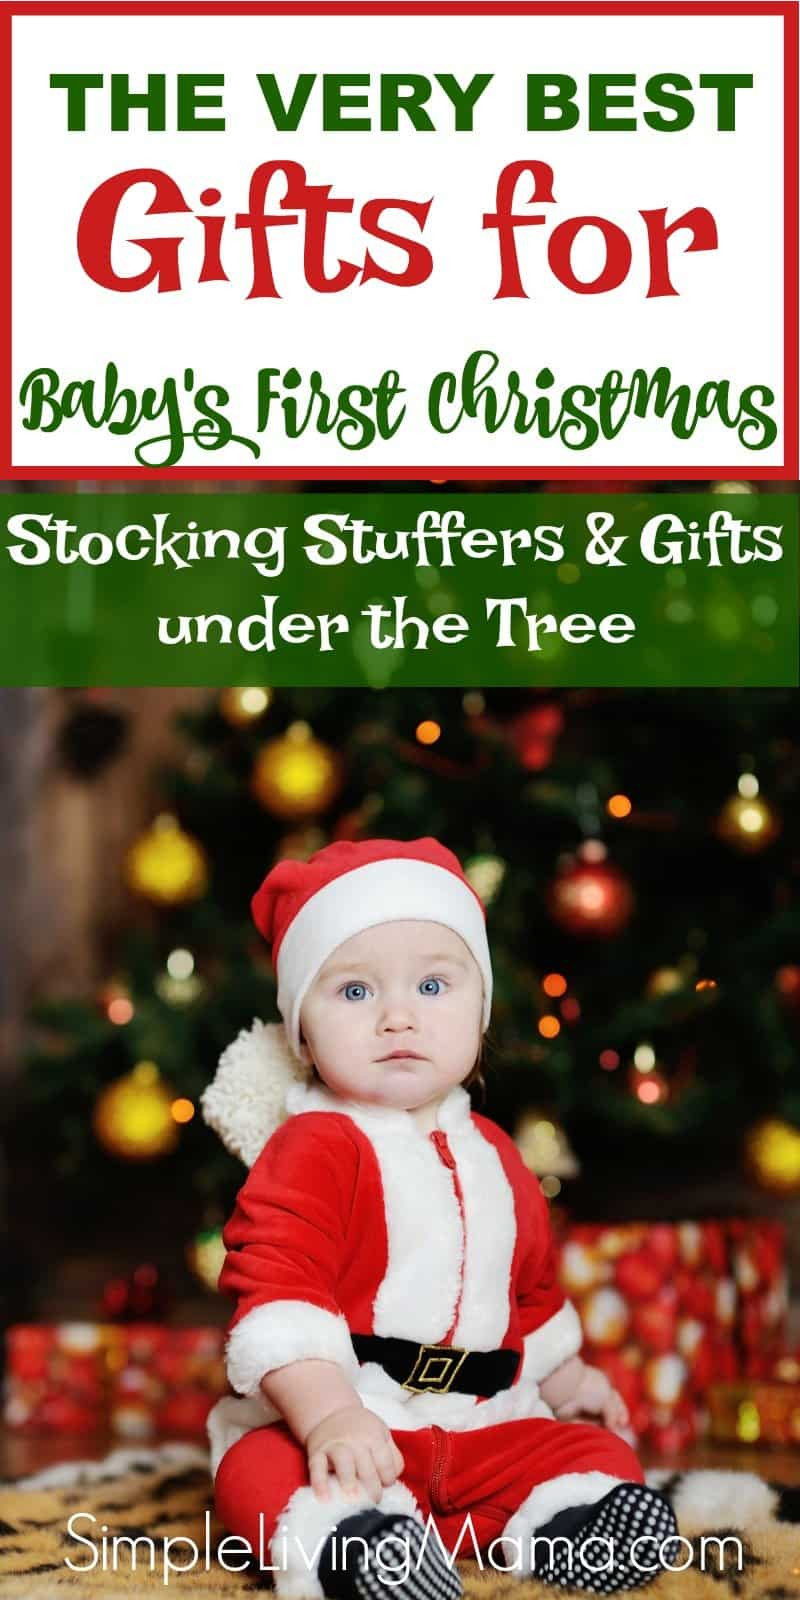 Babys First Christmas Gift Ideas
 Gift Ideas for Baby s First Christmas Simple Living Mama